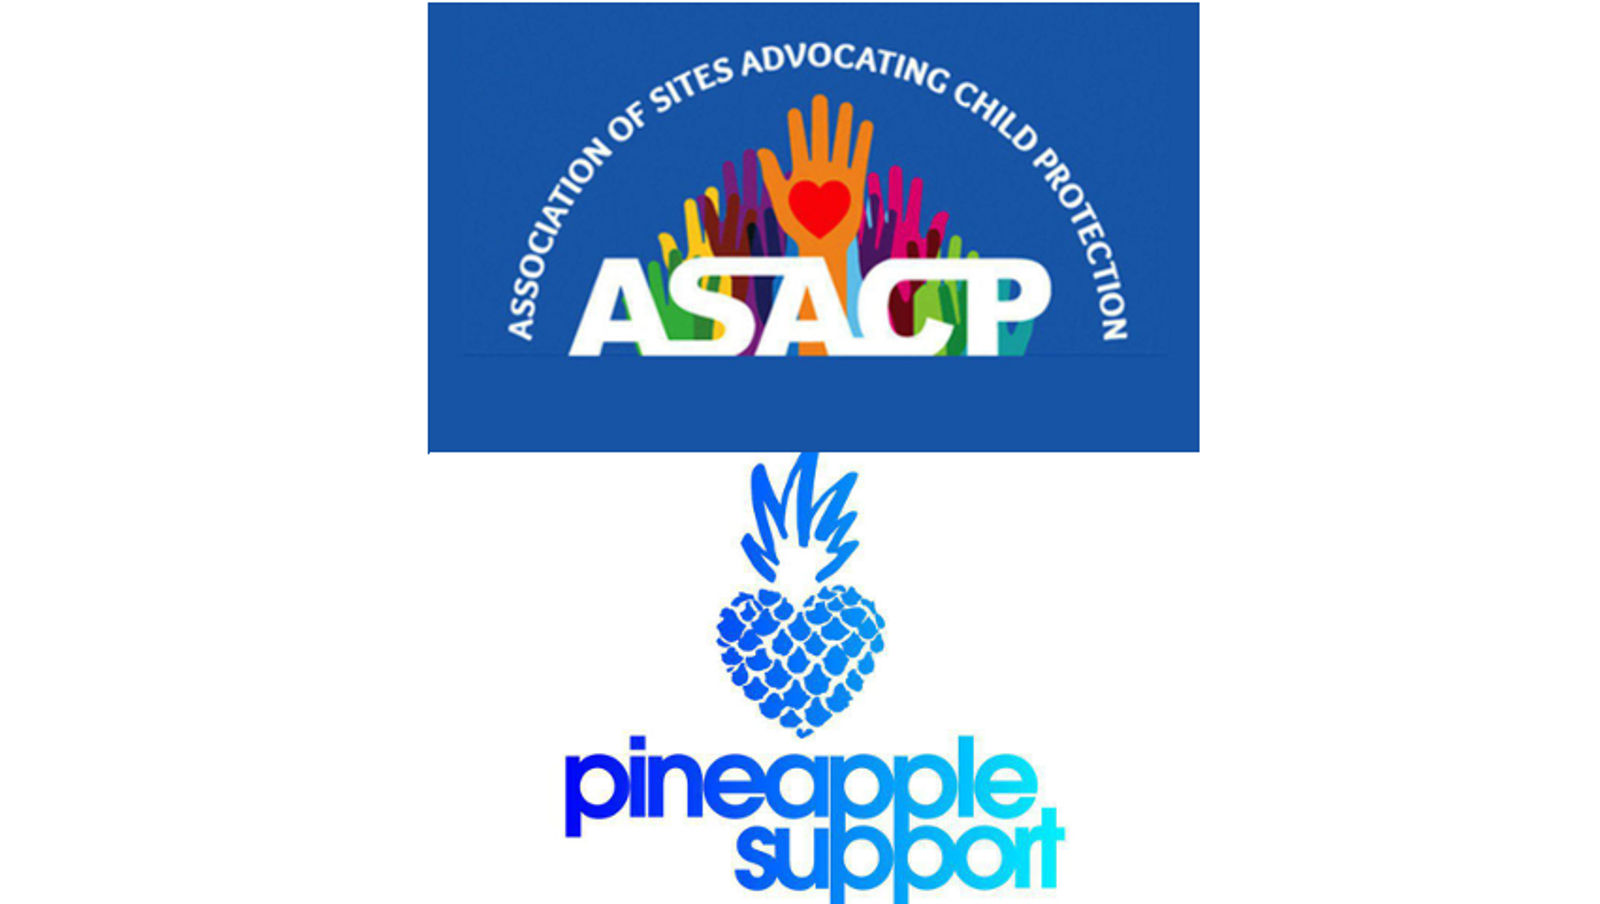 Pineapple Support, ASACP Pledge Mutual Assistance